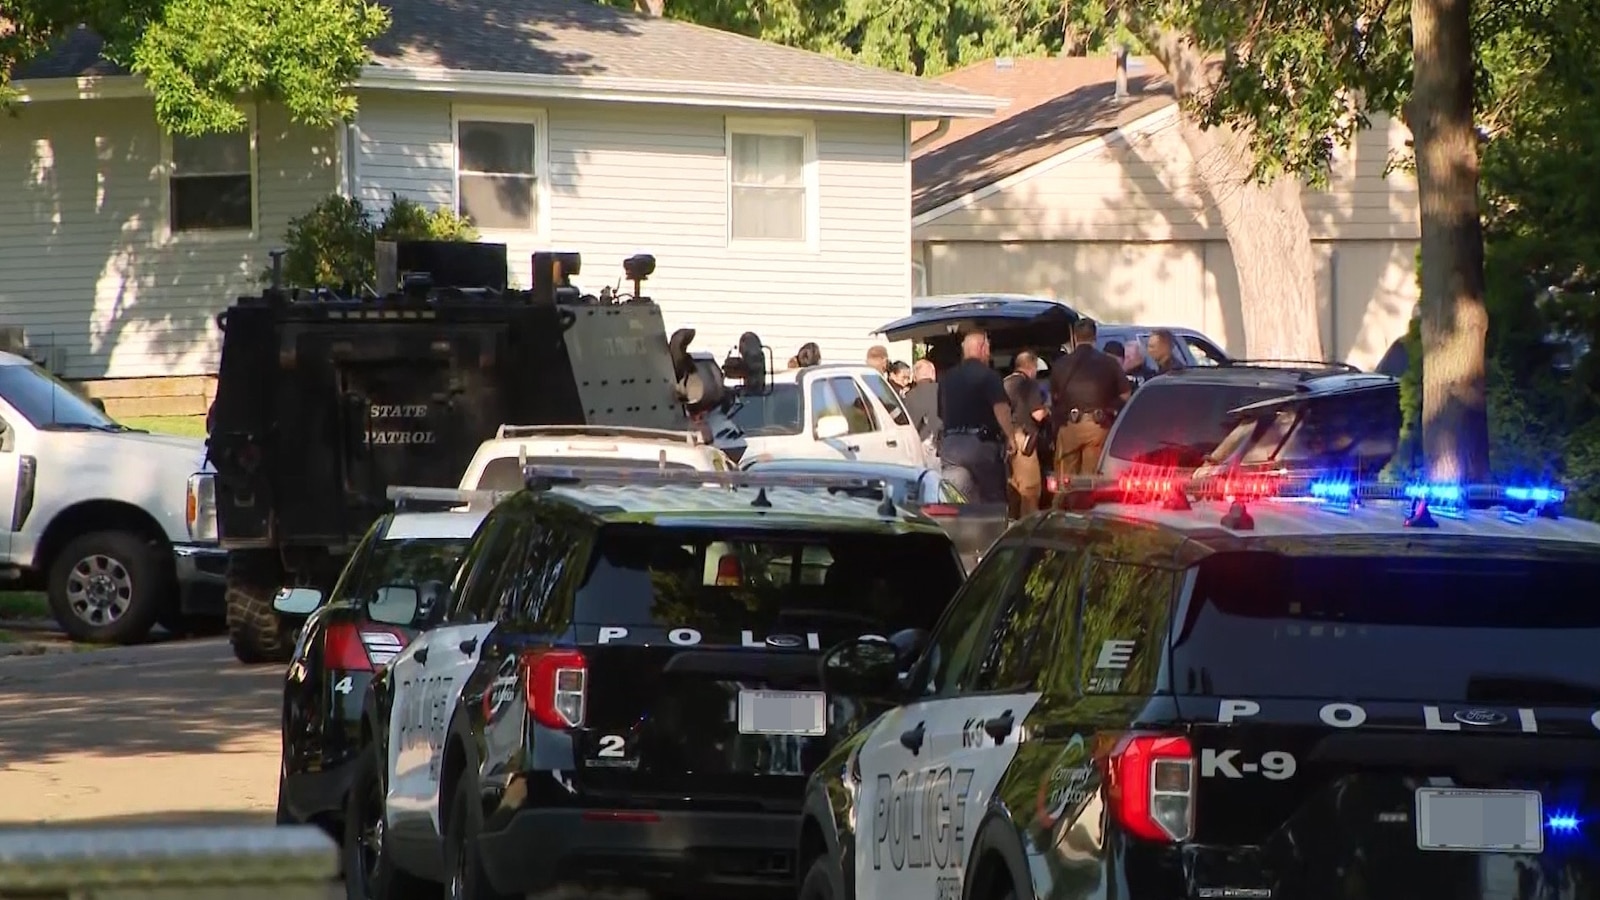 4 children, 3 adults wounded in Nebraska home after neighbor opens fire: Police